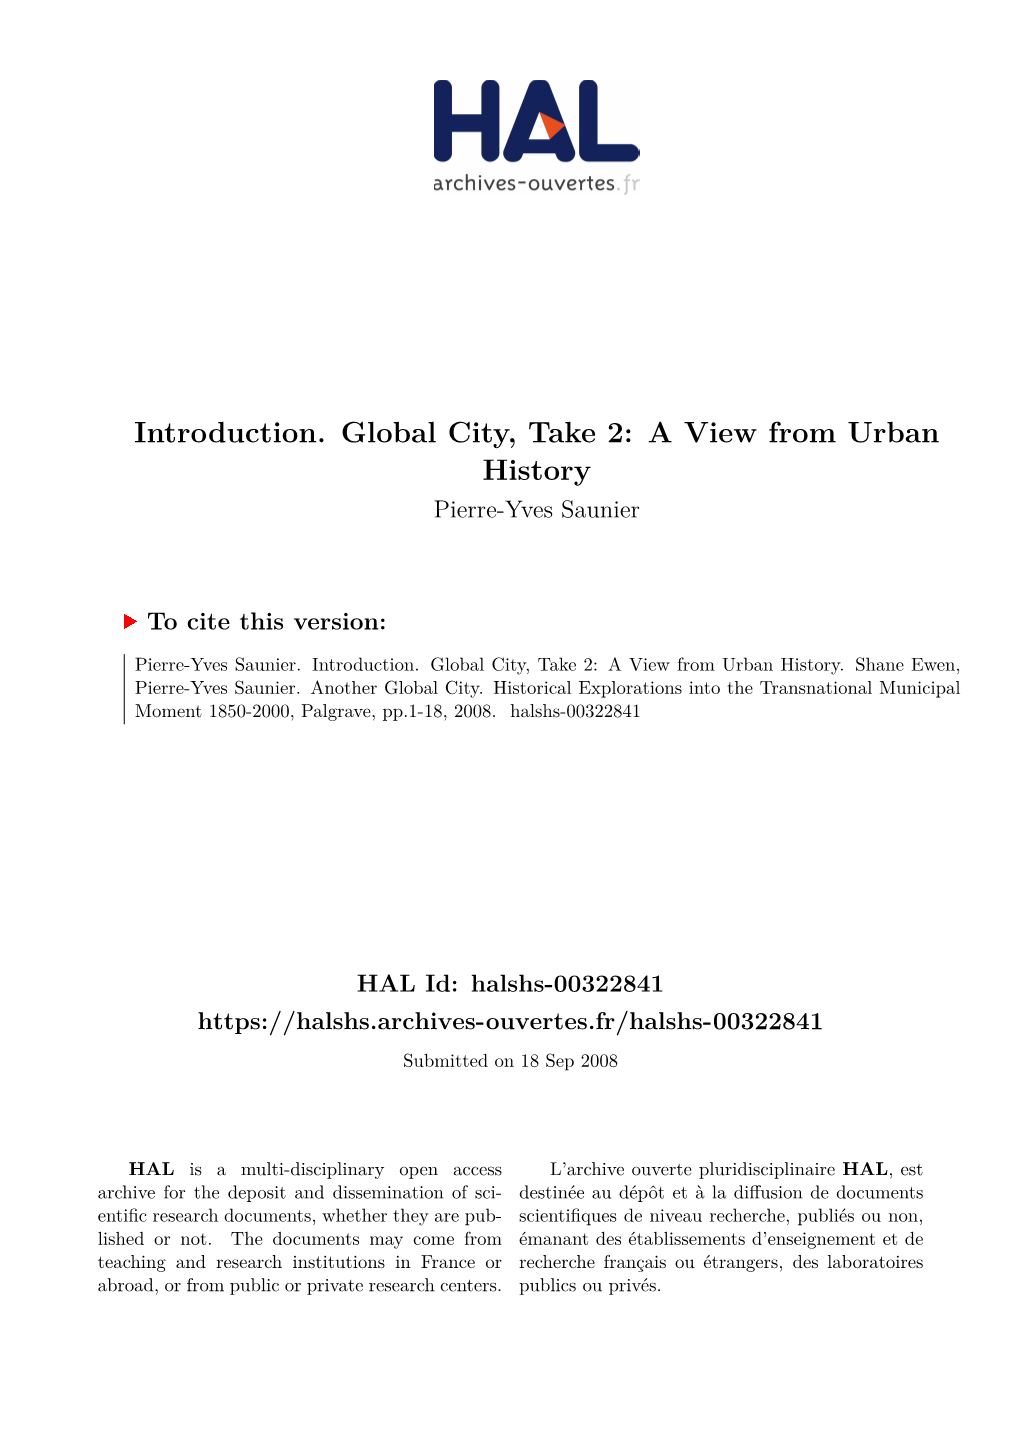 Introduction. Global City, Take 2: a View from Urban History Pierre-Yves Saunier